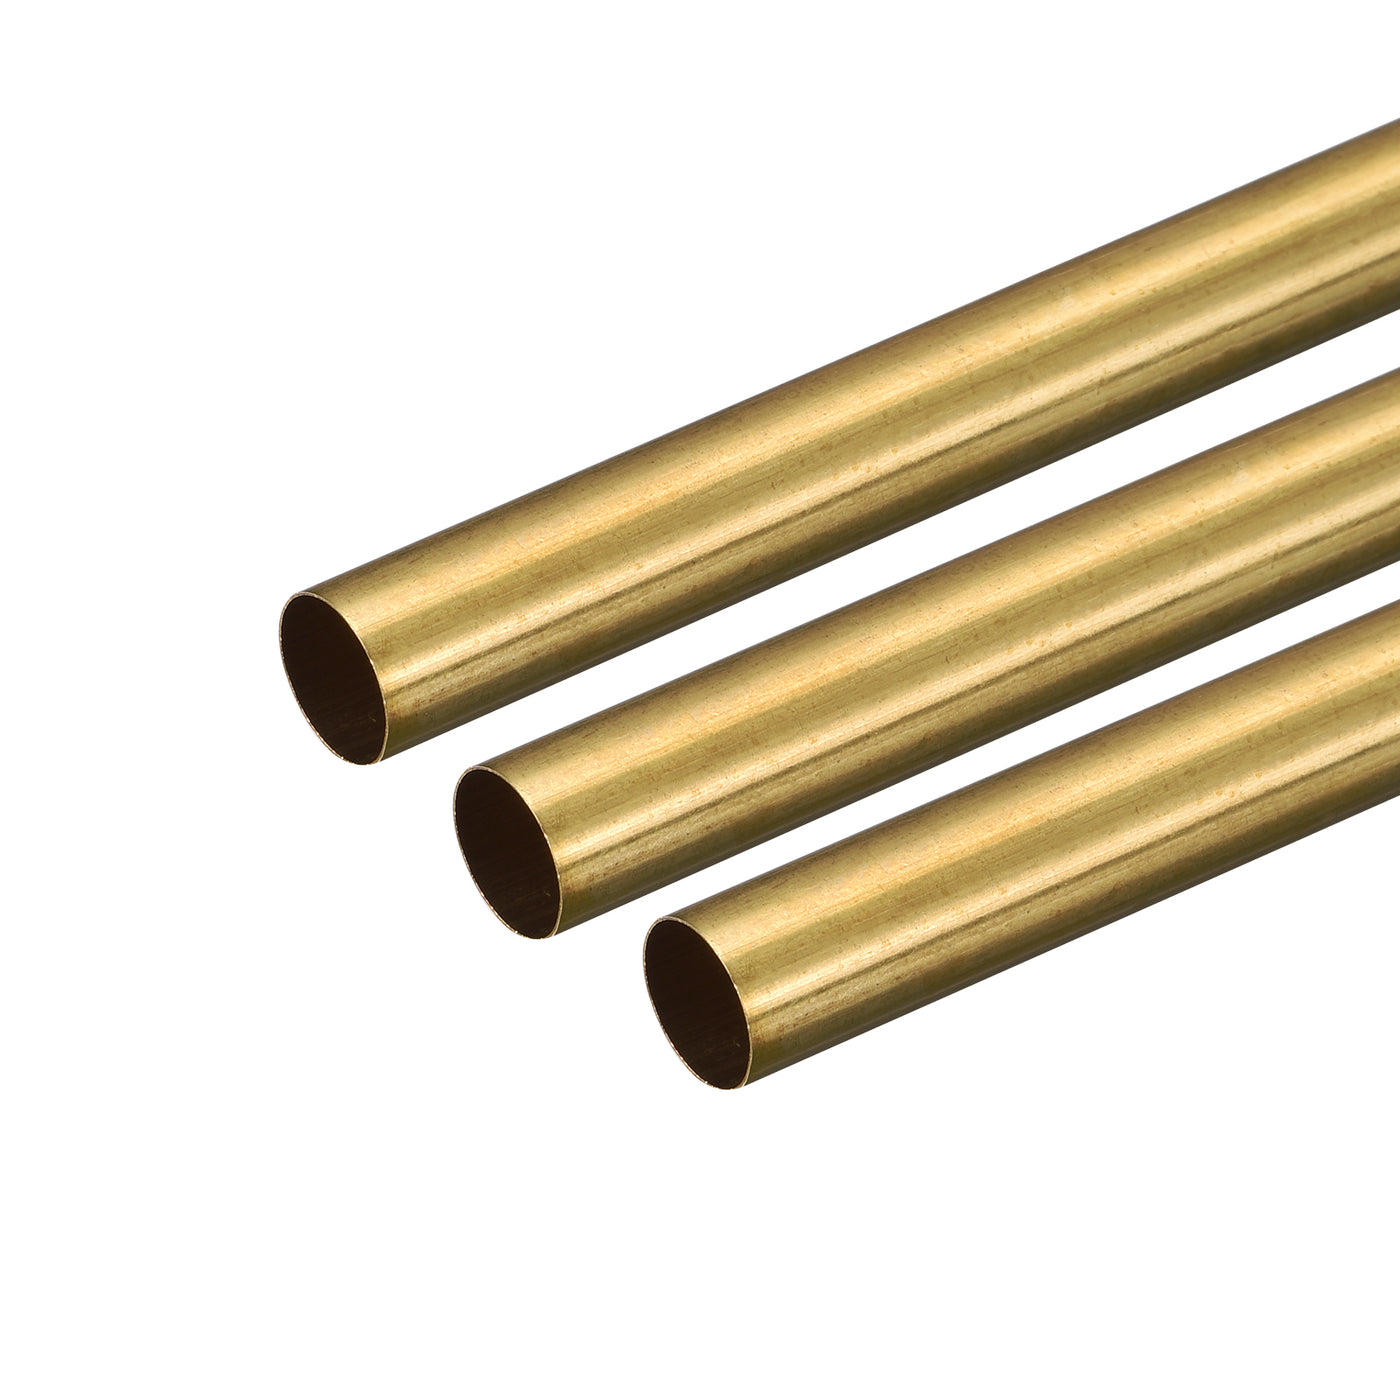 uxcell Uxcell Brass Round Tube 10mm OD 0.2mm Wall Thickness 250mm Length Pipe Tubing 3 Pcs